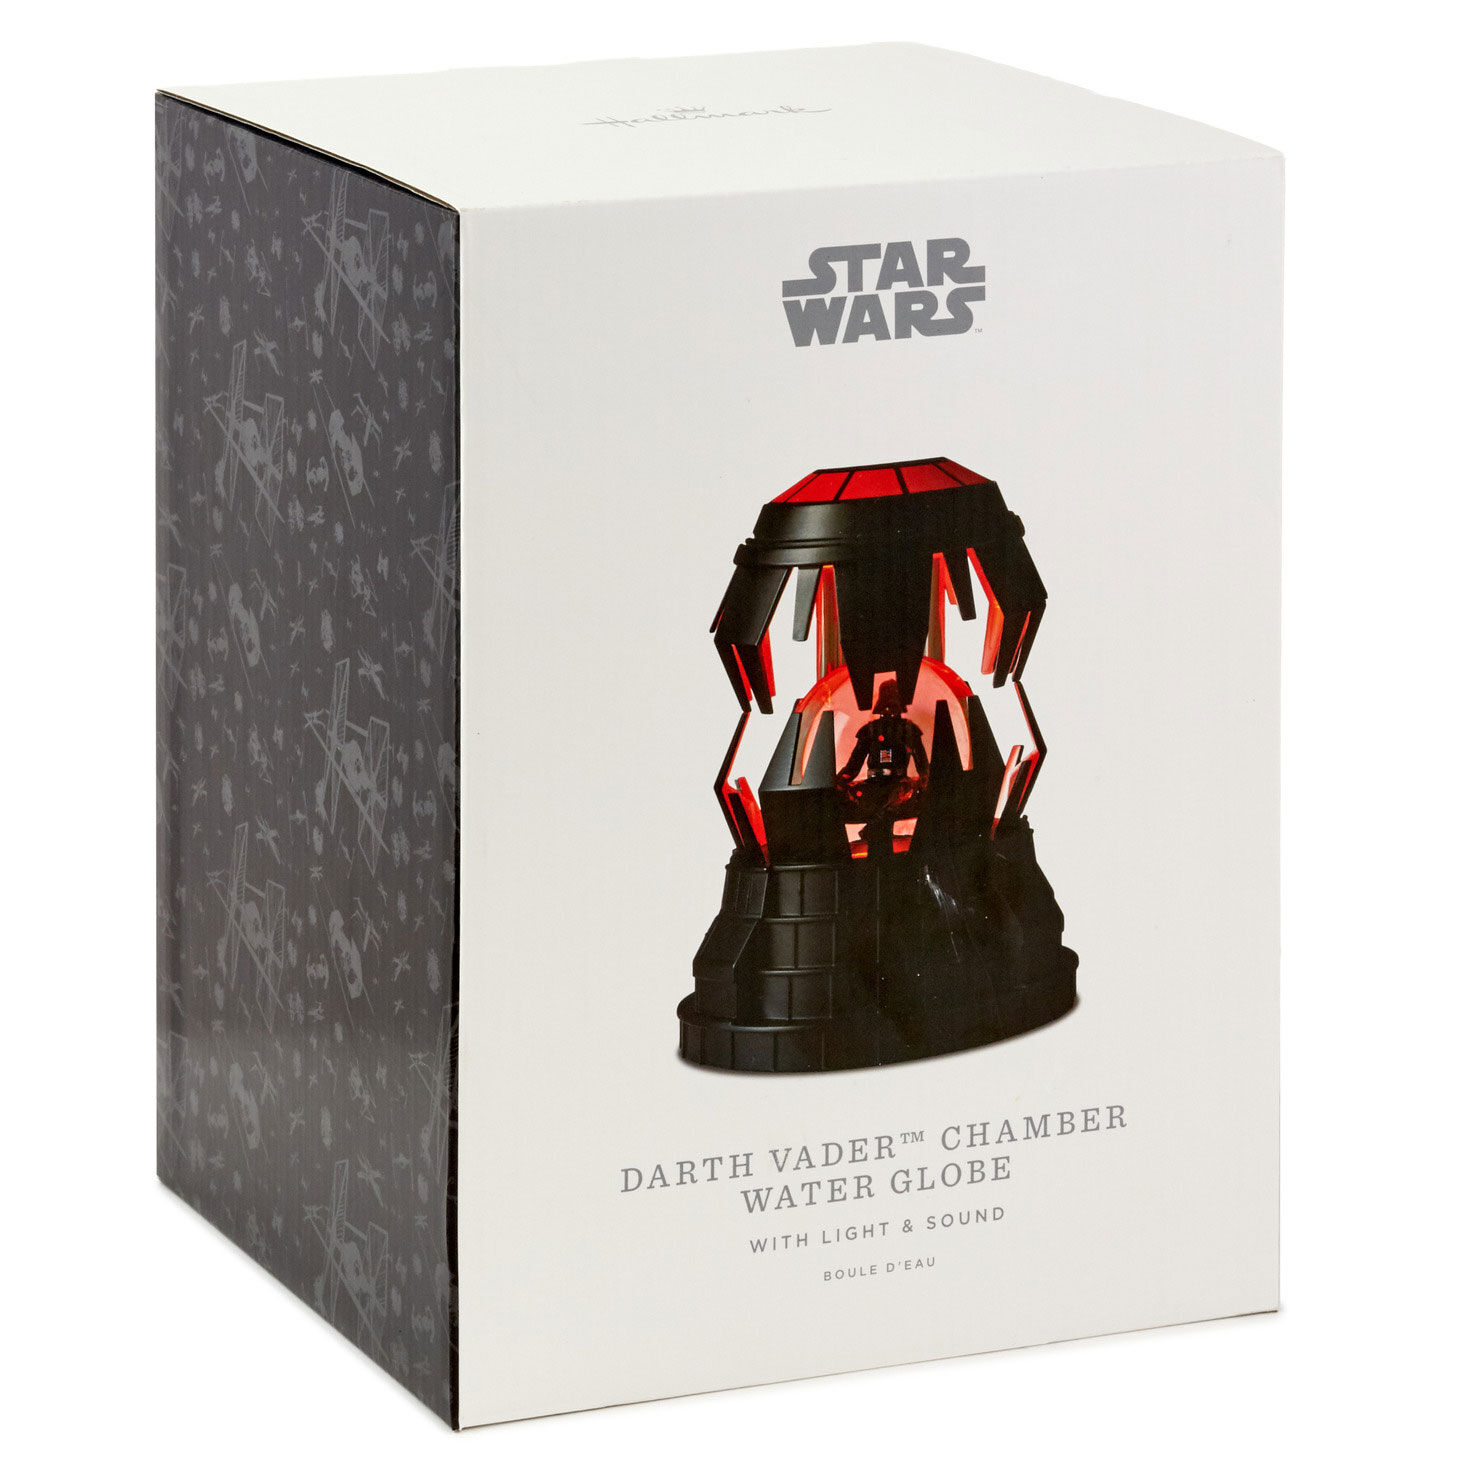 Star Wars™ Darth Vader™ Chamber Water Globe With Light and Sound for only USD 99.99 | Hallmark